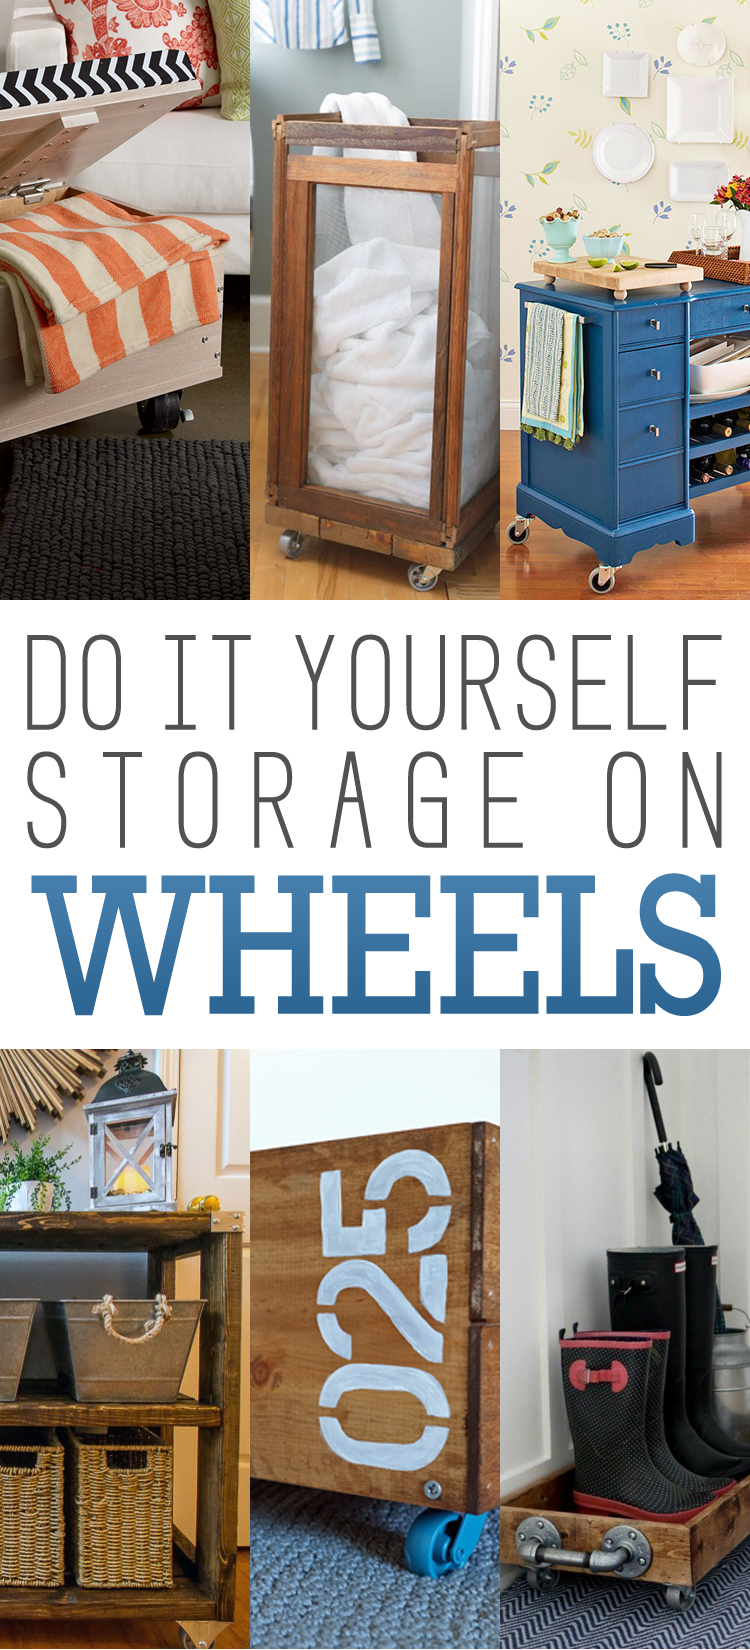 http://thecottagemarket.com/wp-content/uploads/2015/10/Wheels-TOWER-0001.png